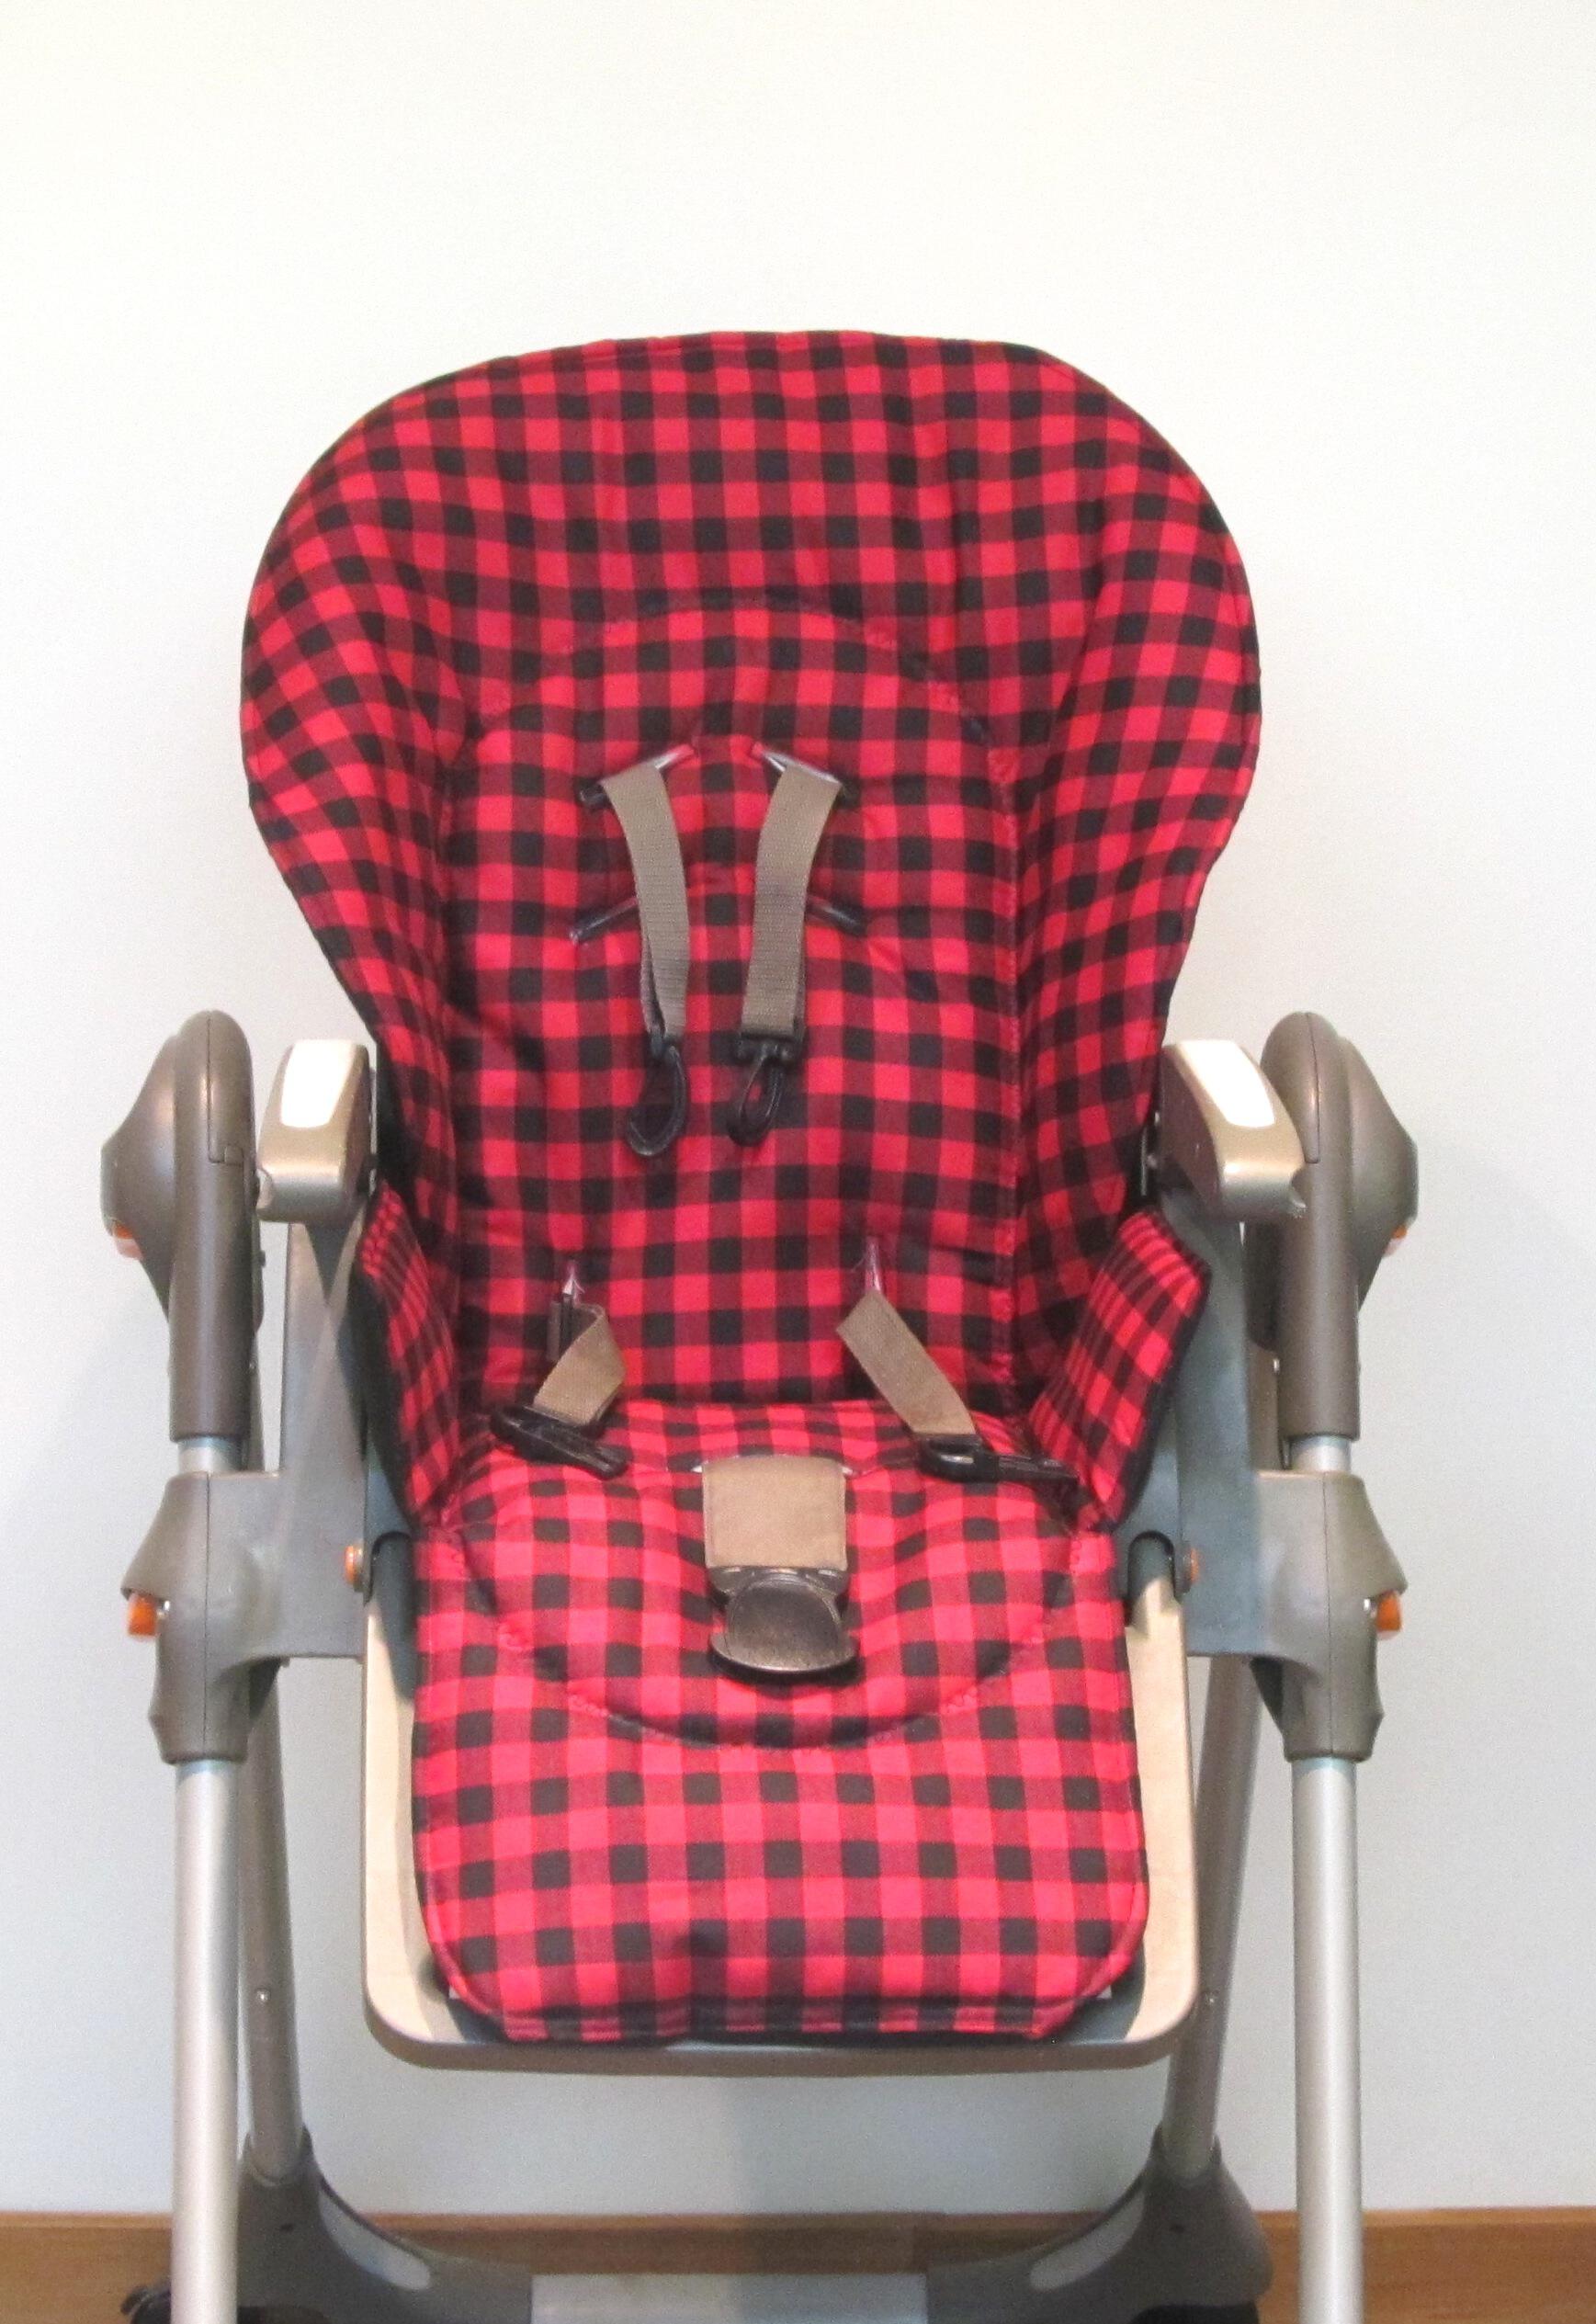 red and black checked replacement high chair pad for the DLX 6in1 or chicco chairs